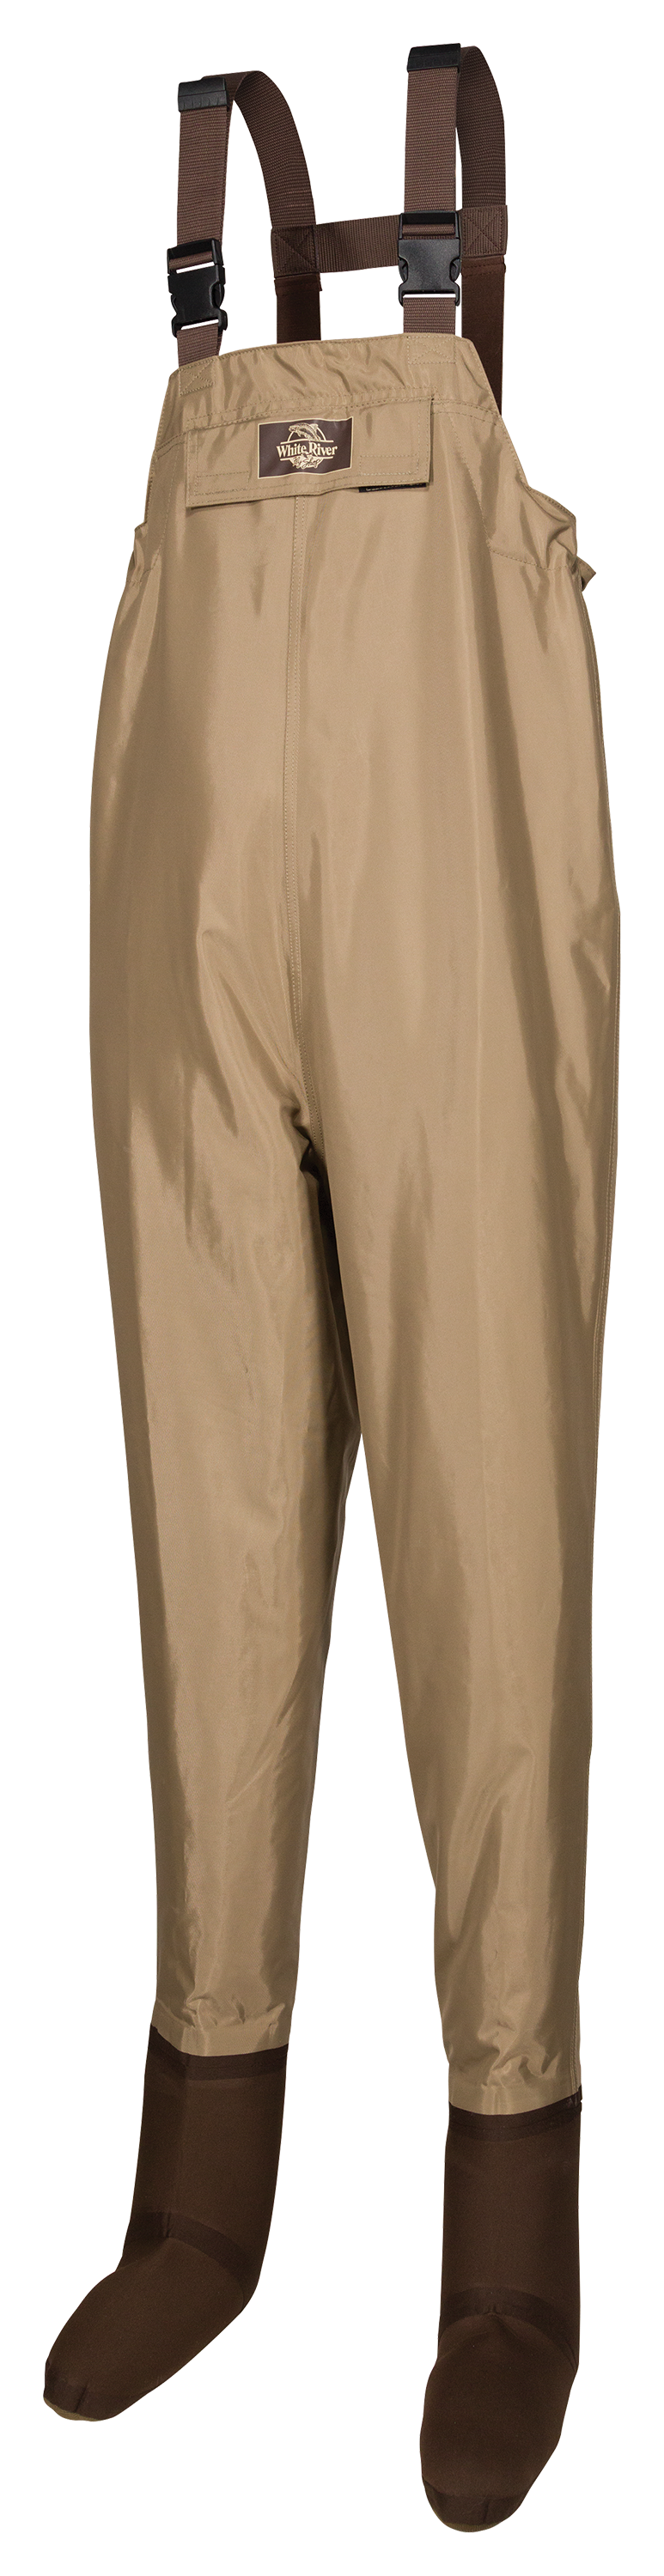 White River Fly Shop Three Forks Stocking-Foot Chest Waders for Men